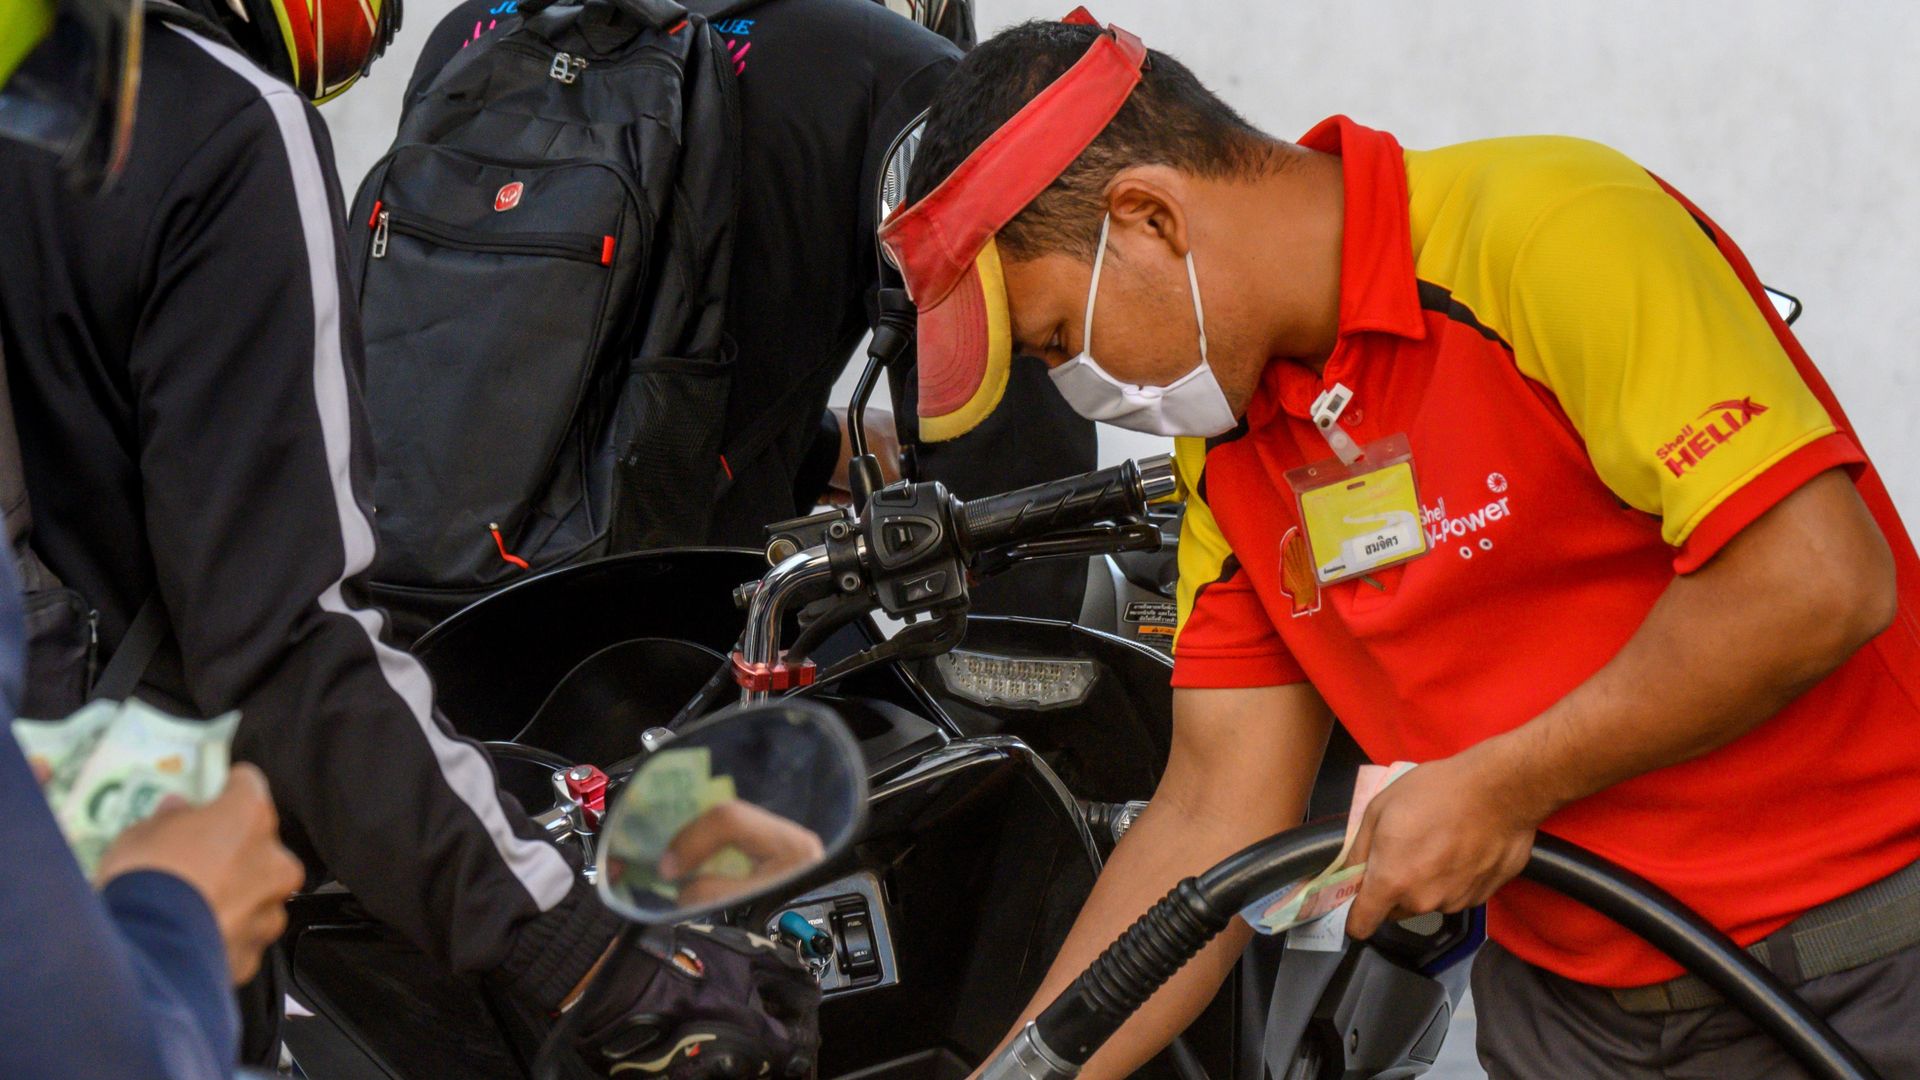 A Shell employee in Bangkok filling up someone's gas tank.